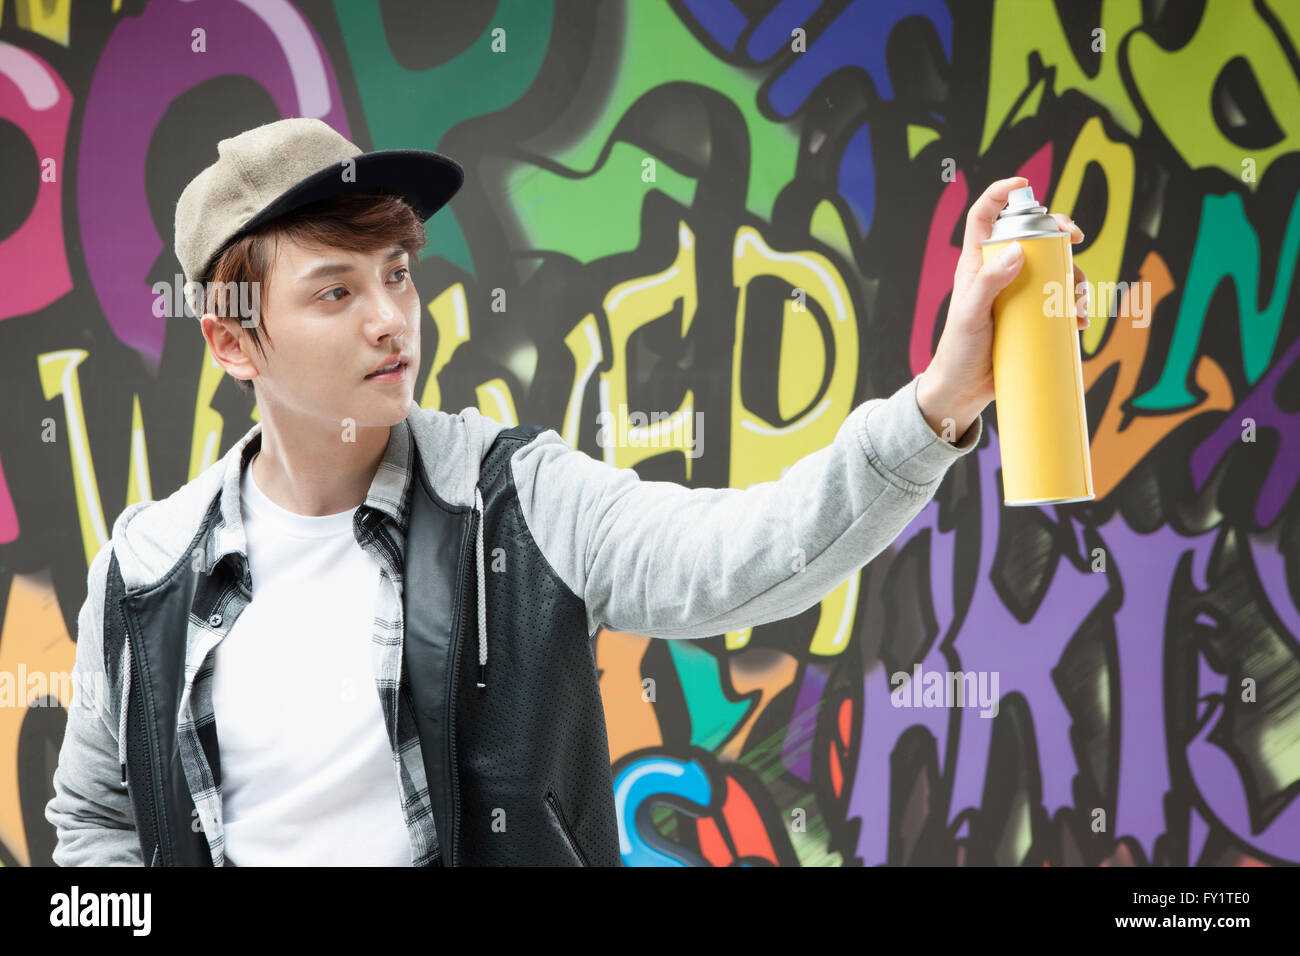 Portrait of young man in hip-hop style holding a spray against graffiti art Stock Photo